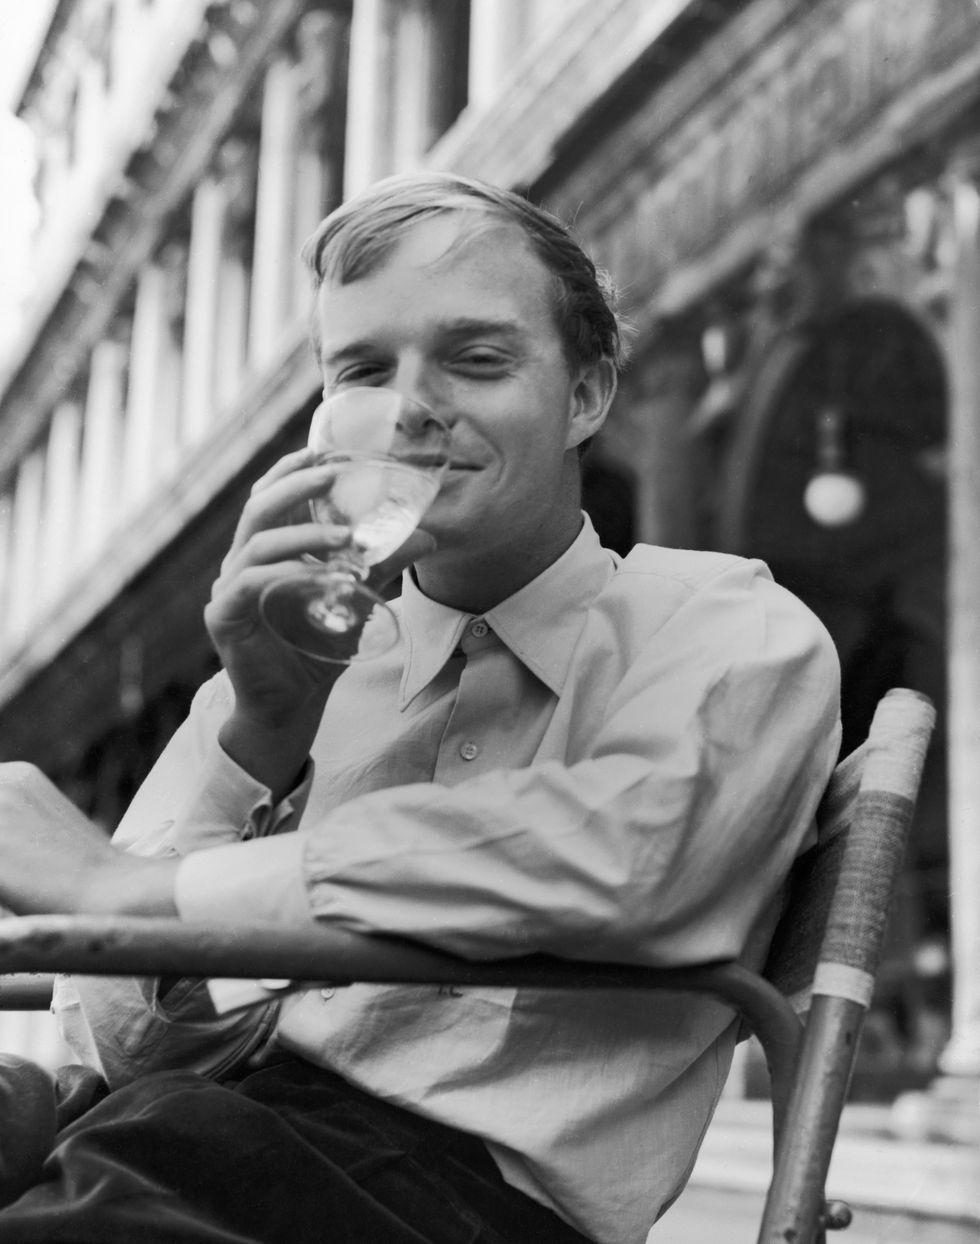 truman capote smiles while taking a drink from a glass, he sits outside a stone building and wears a collared shirt and pants